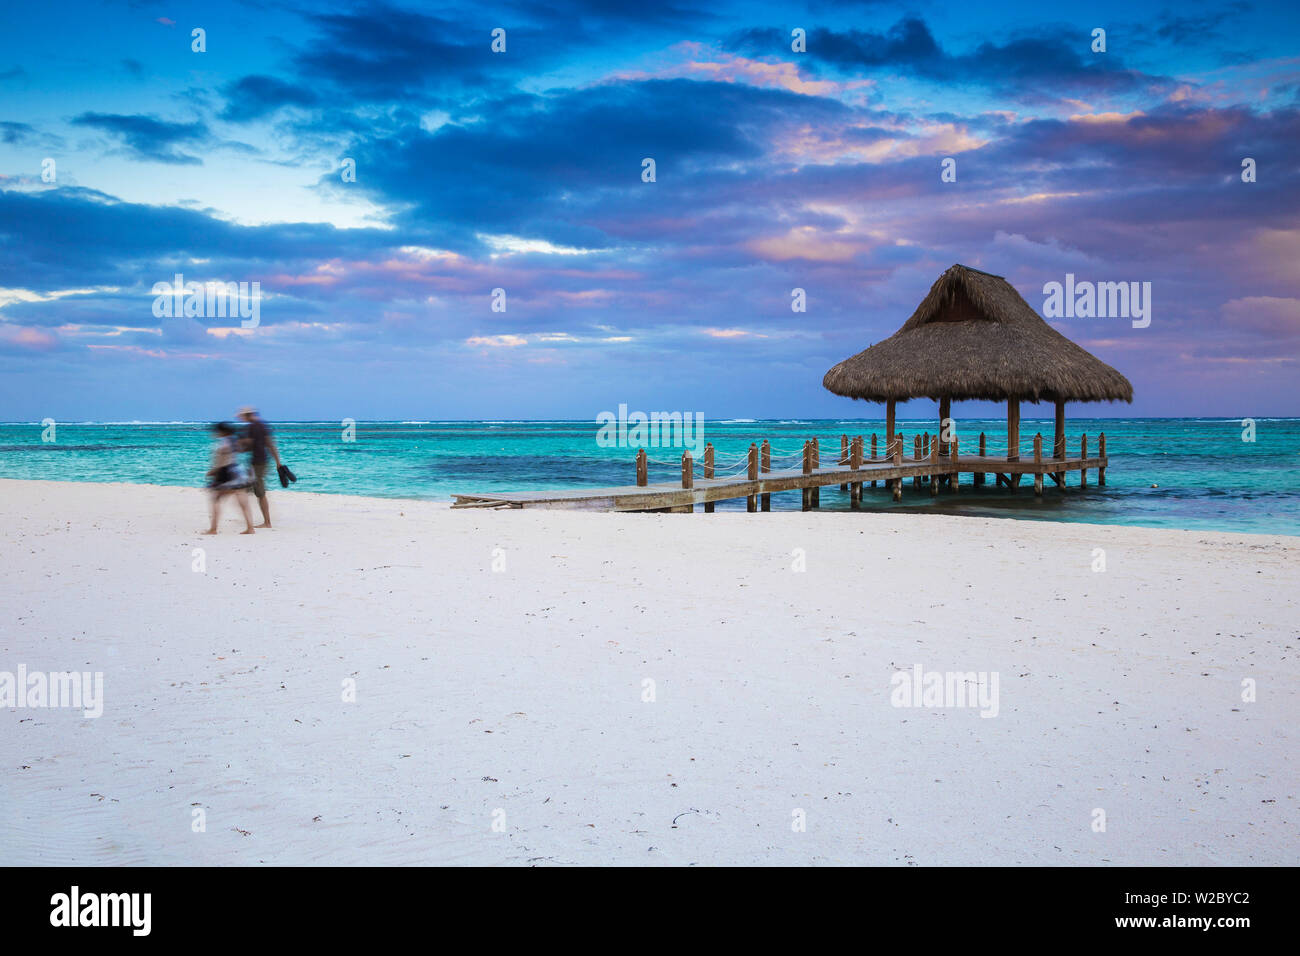 Dominican Republic, Punta Cana, Playa Blanca, Couple walking along beach past wooden pier with thatched hut Stock Photo